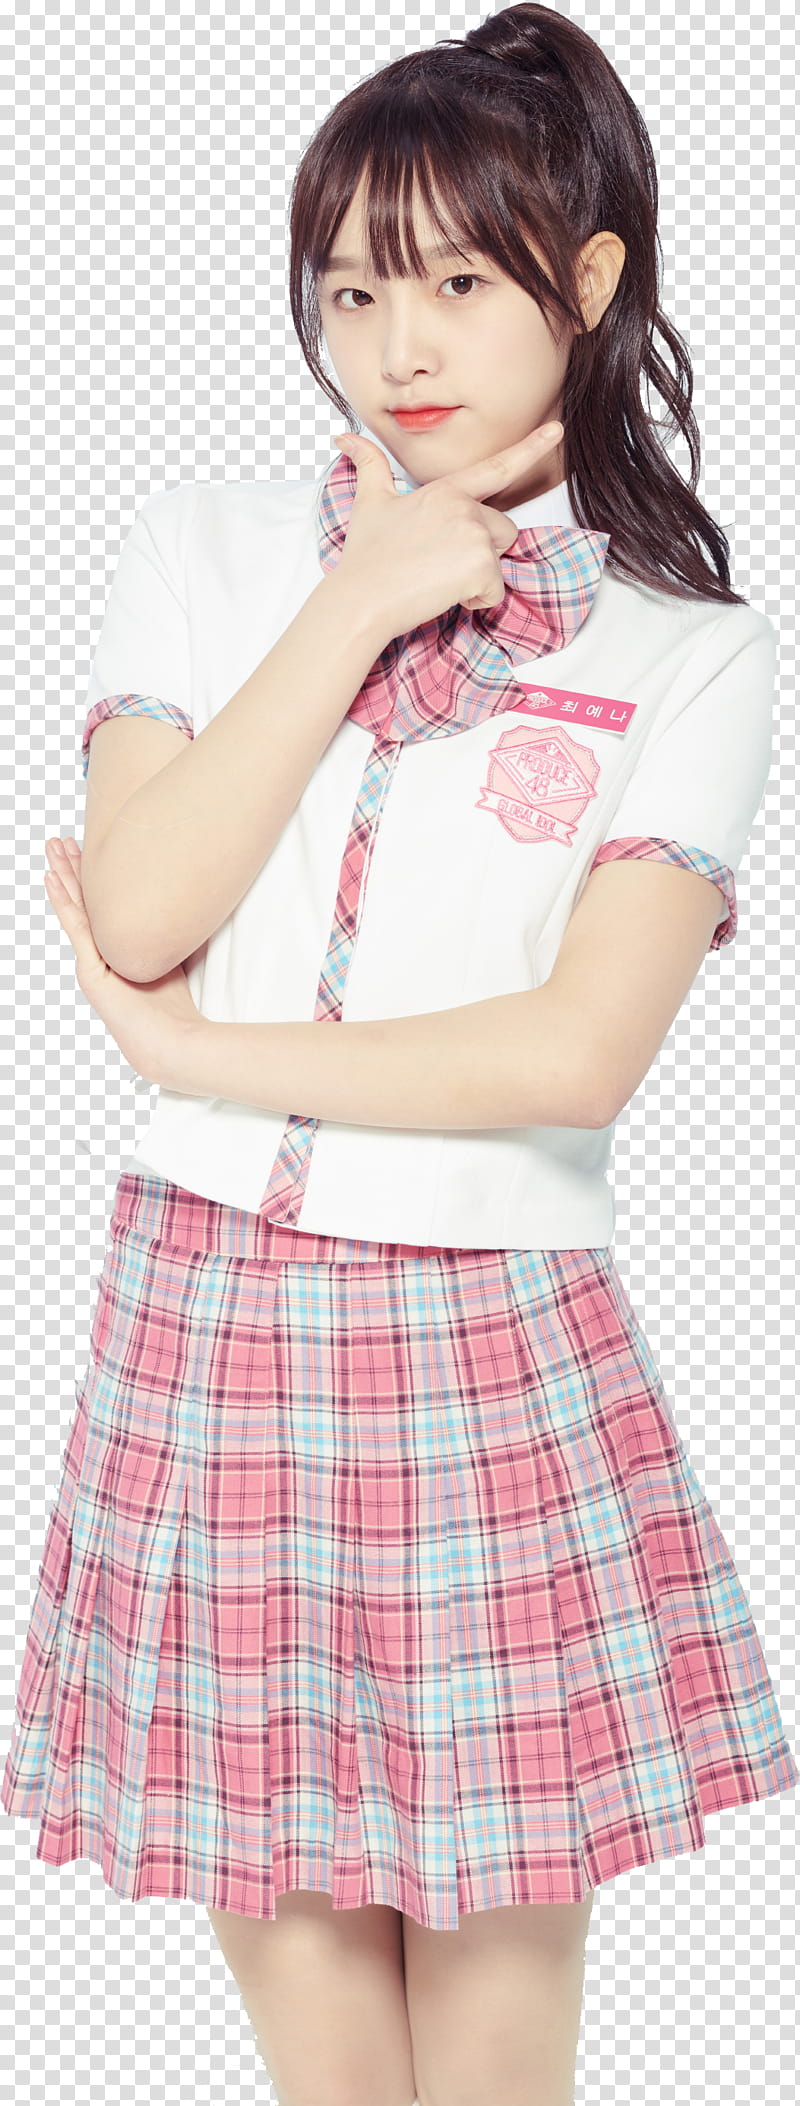 Choi Yena Produce IZ ONE, woman wearing white and red school uniform transparent background PNG clipart